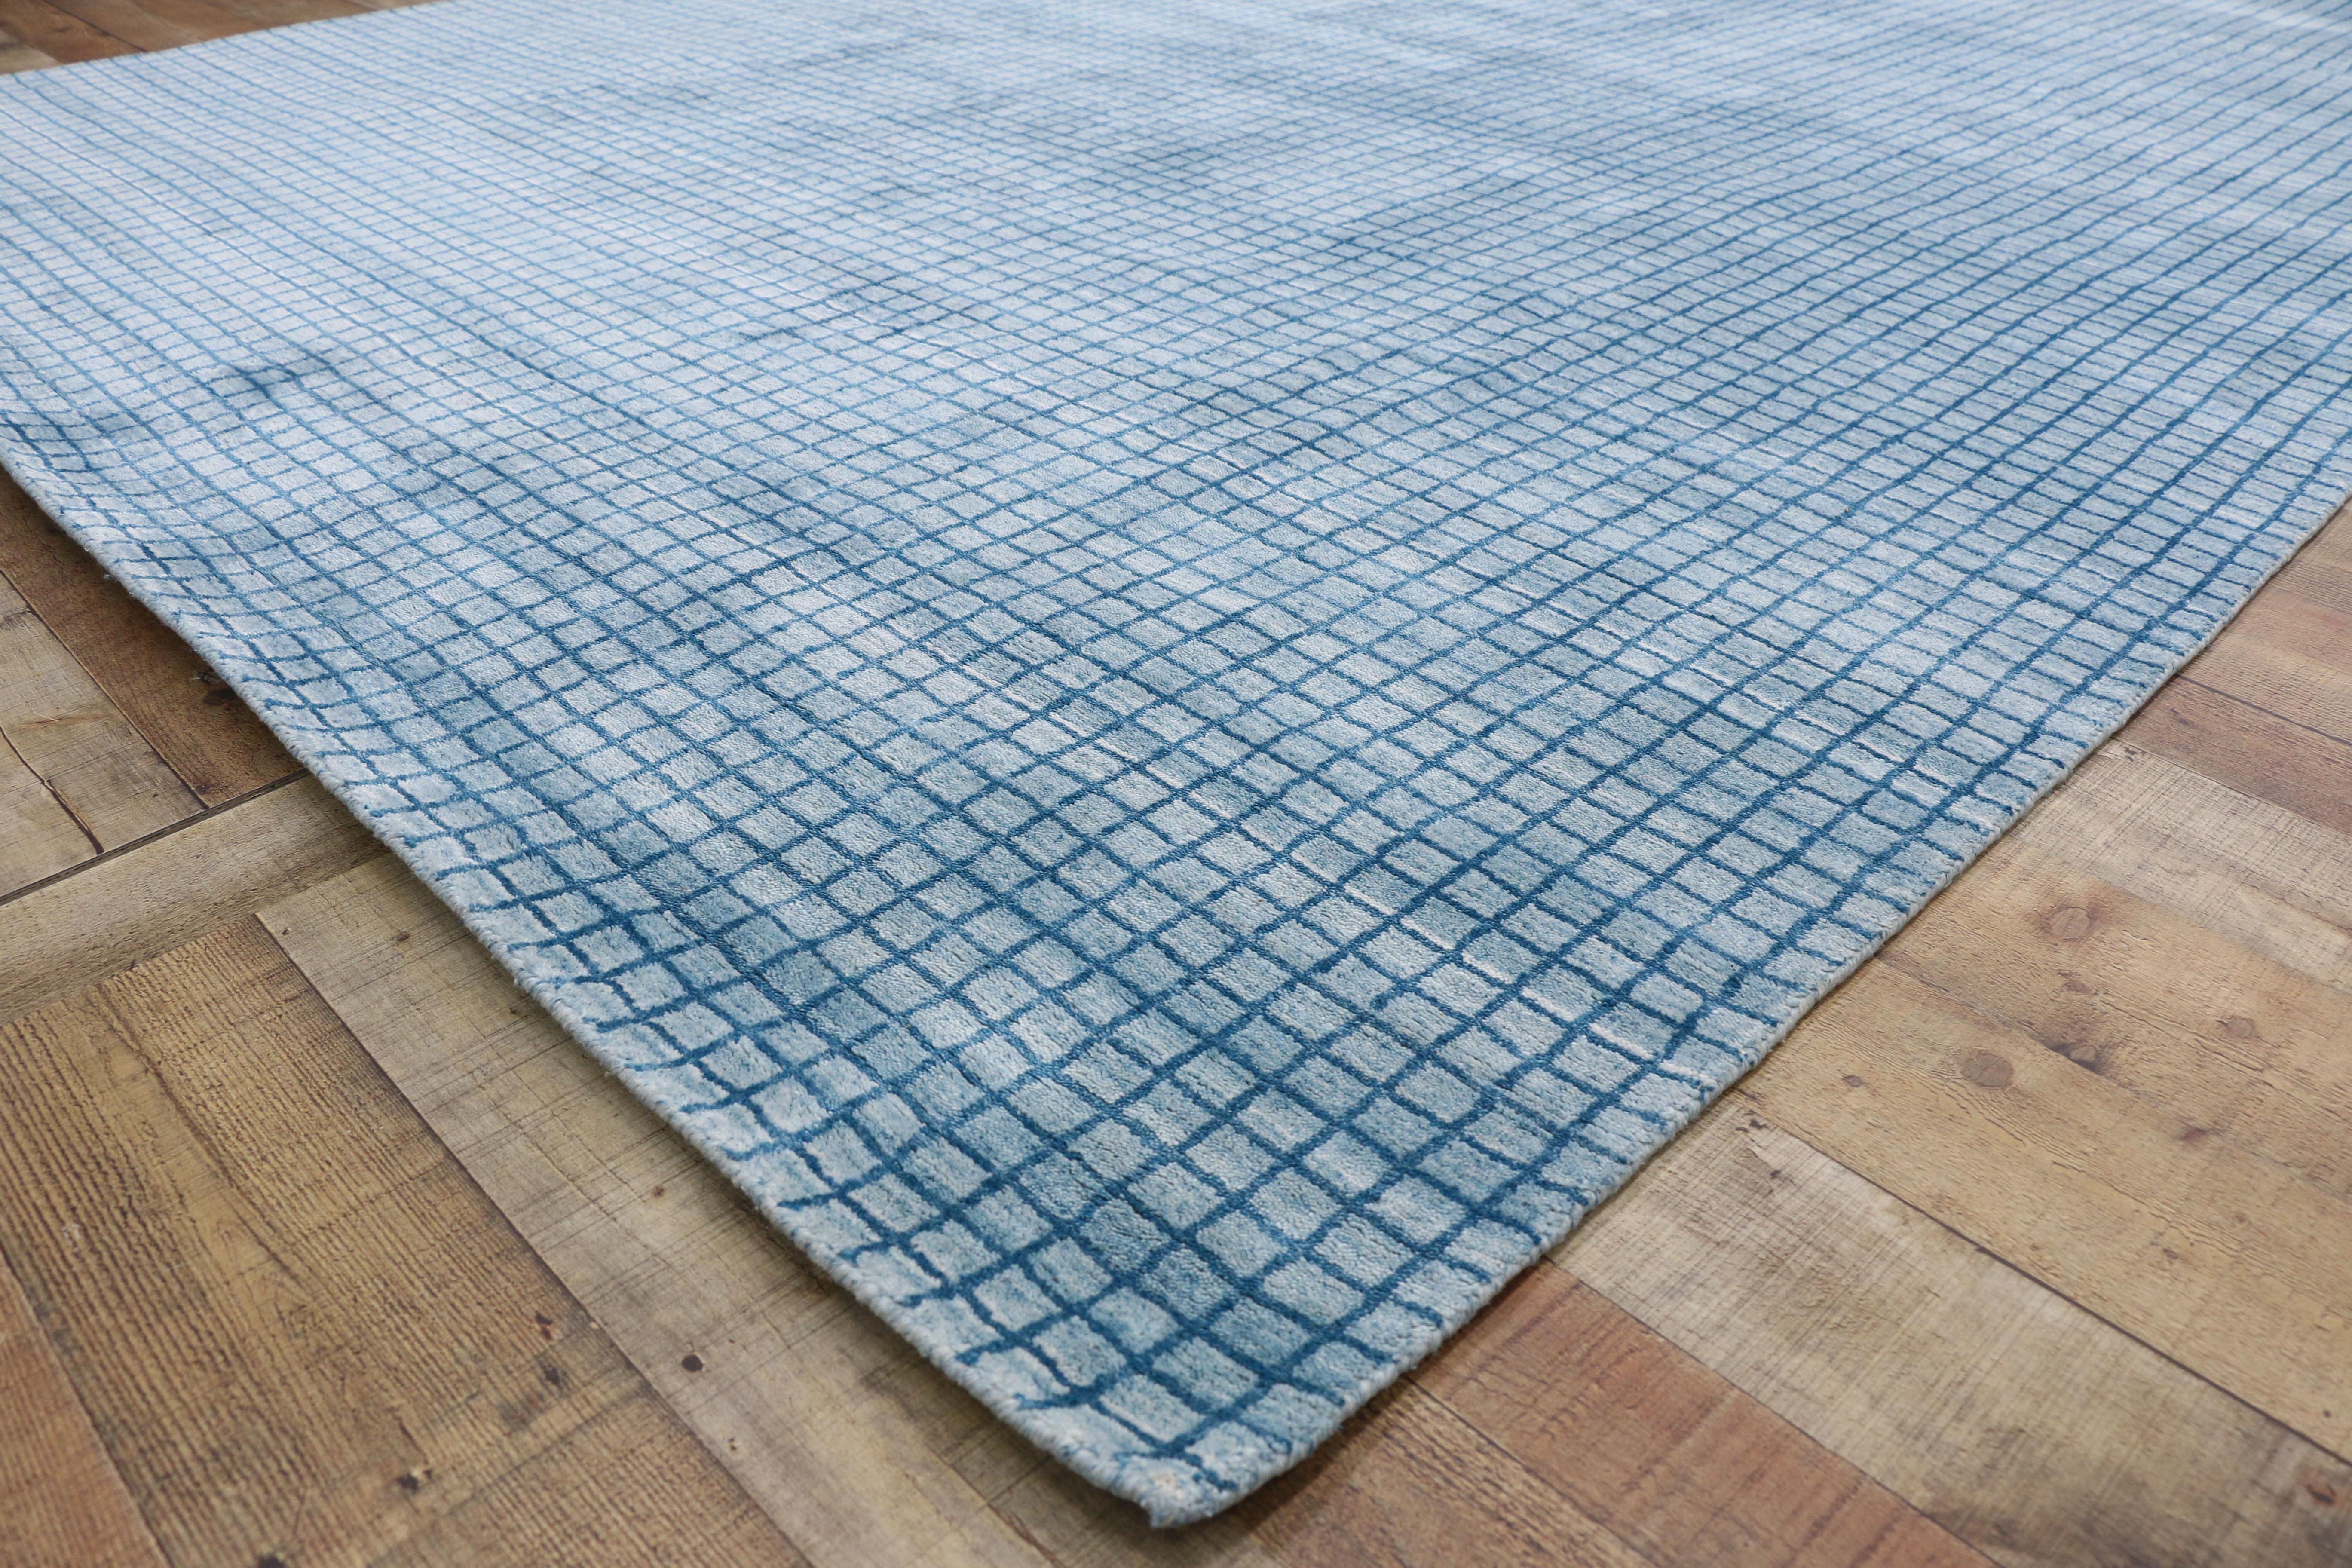 Post-Modern Contemporary Beach Style Area Rug with Grid Pattern and Coastal Living Style